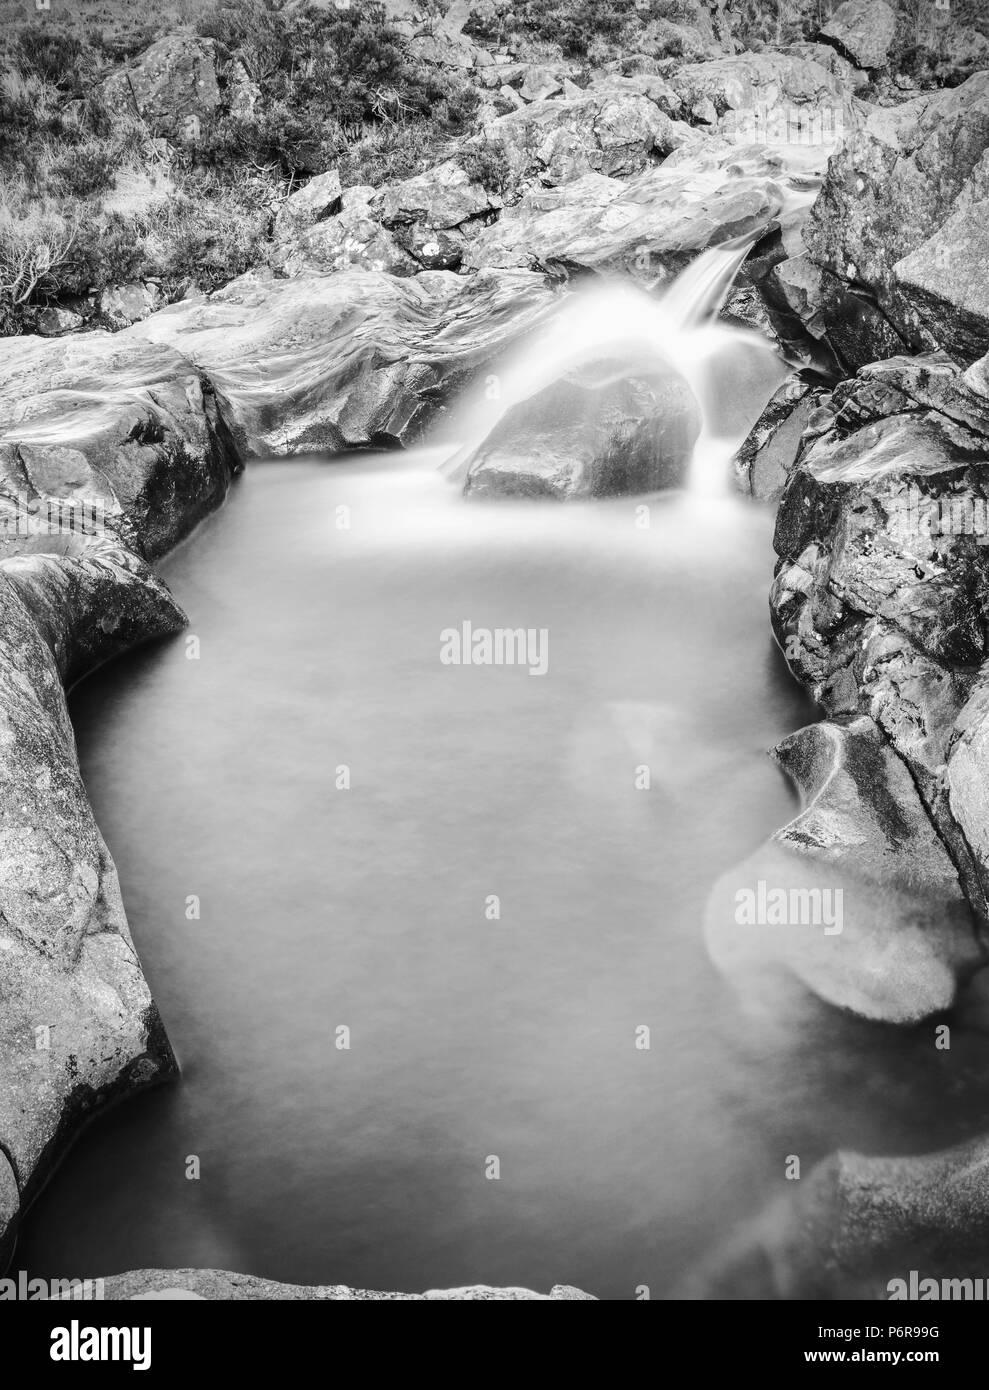 Multiple waterfalls on River Brittle  with many cold swimmable pools. Black and white photography Stock Photo